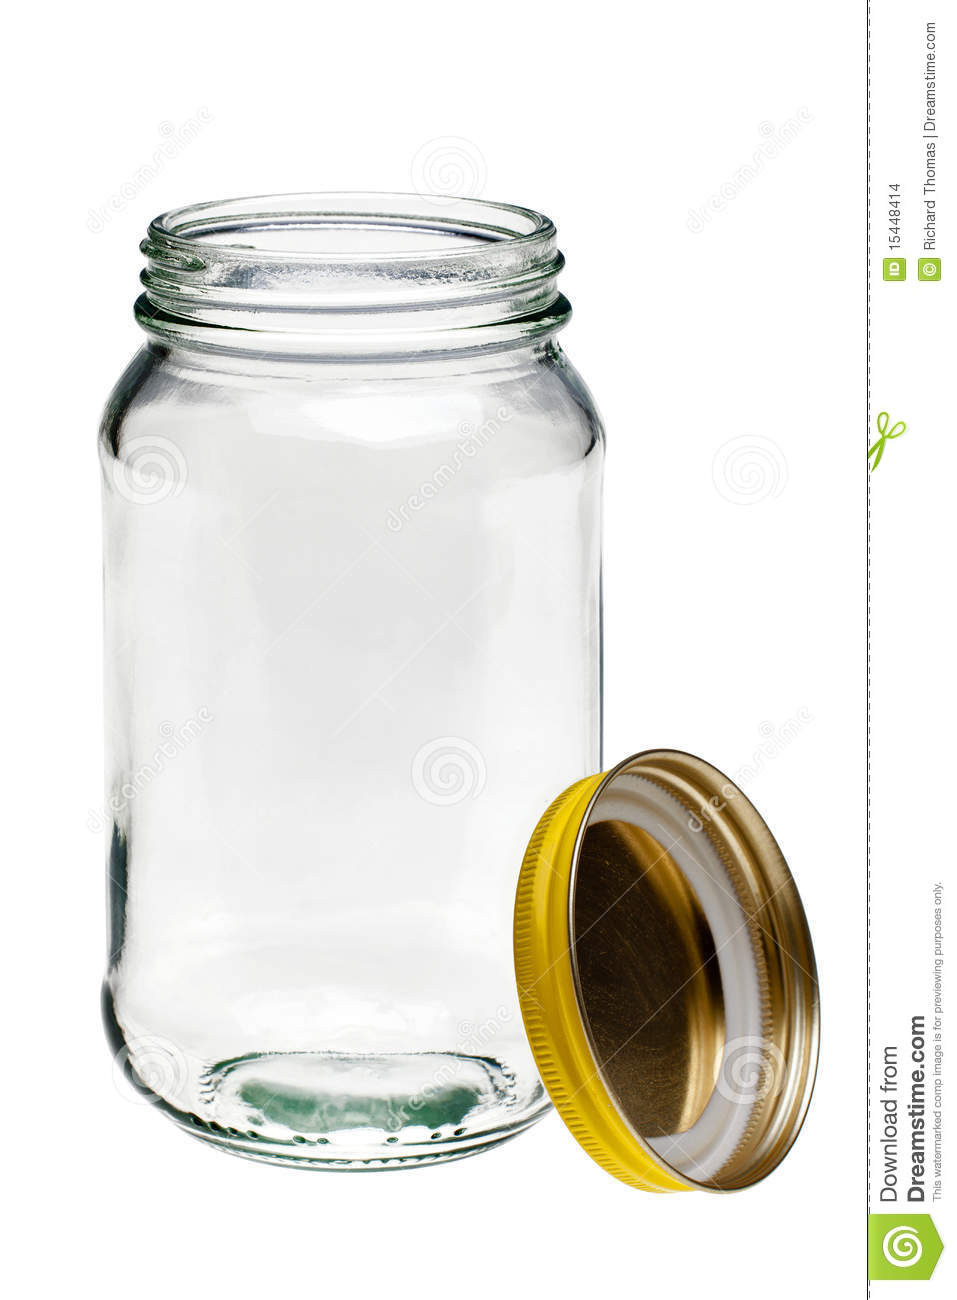 Glass Jar And Lid Isolated On White Stock Images   Image  15448414